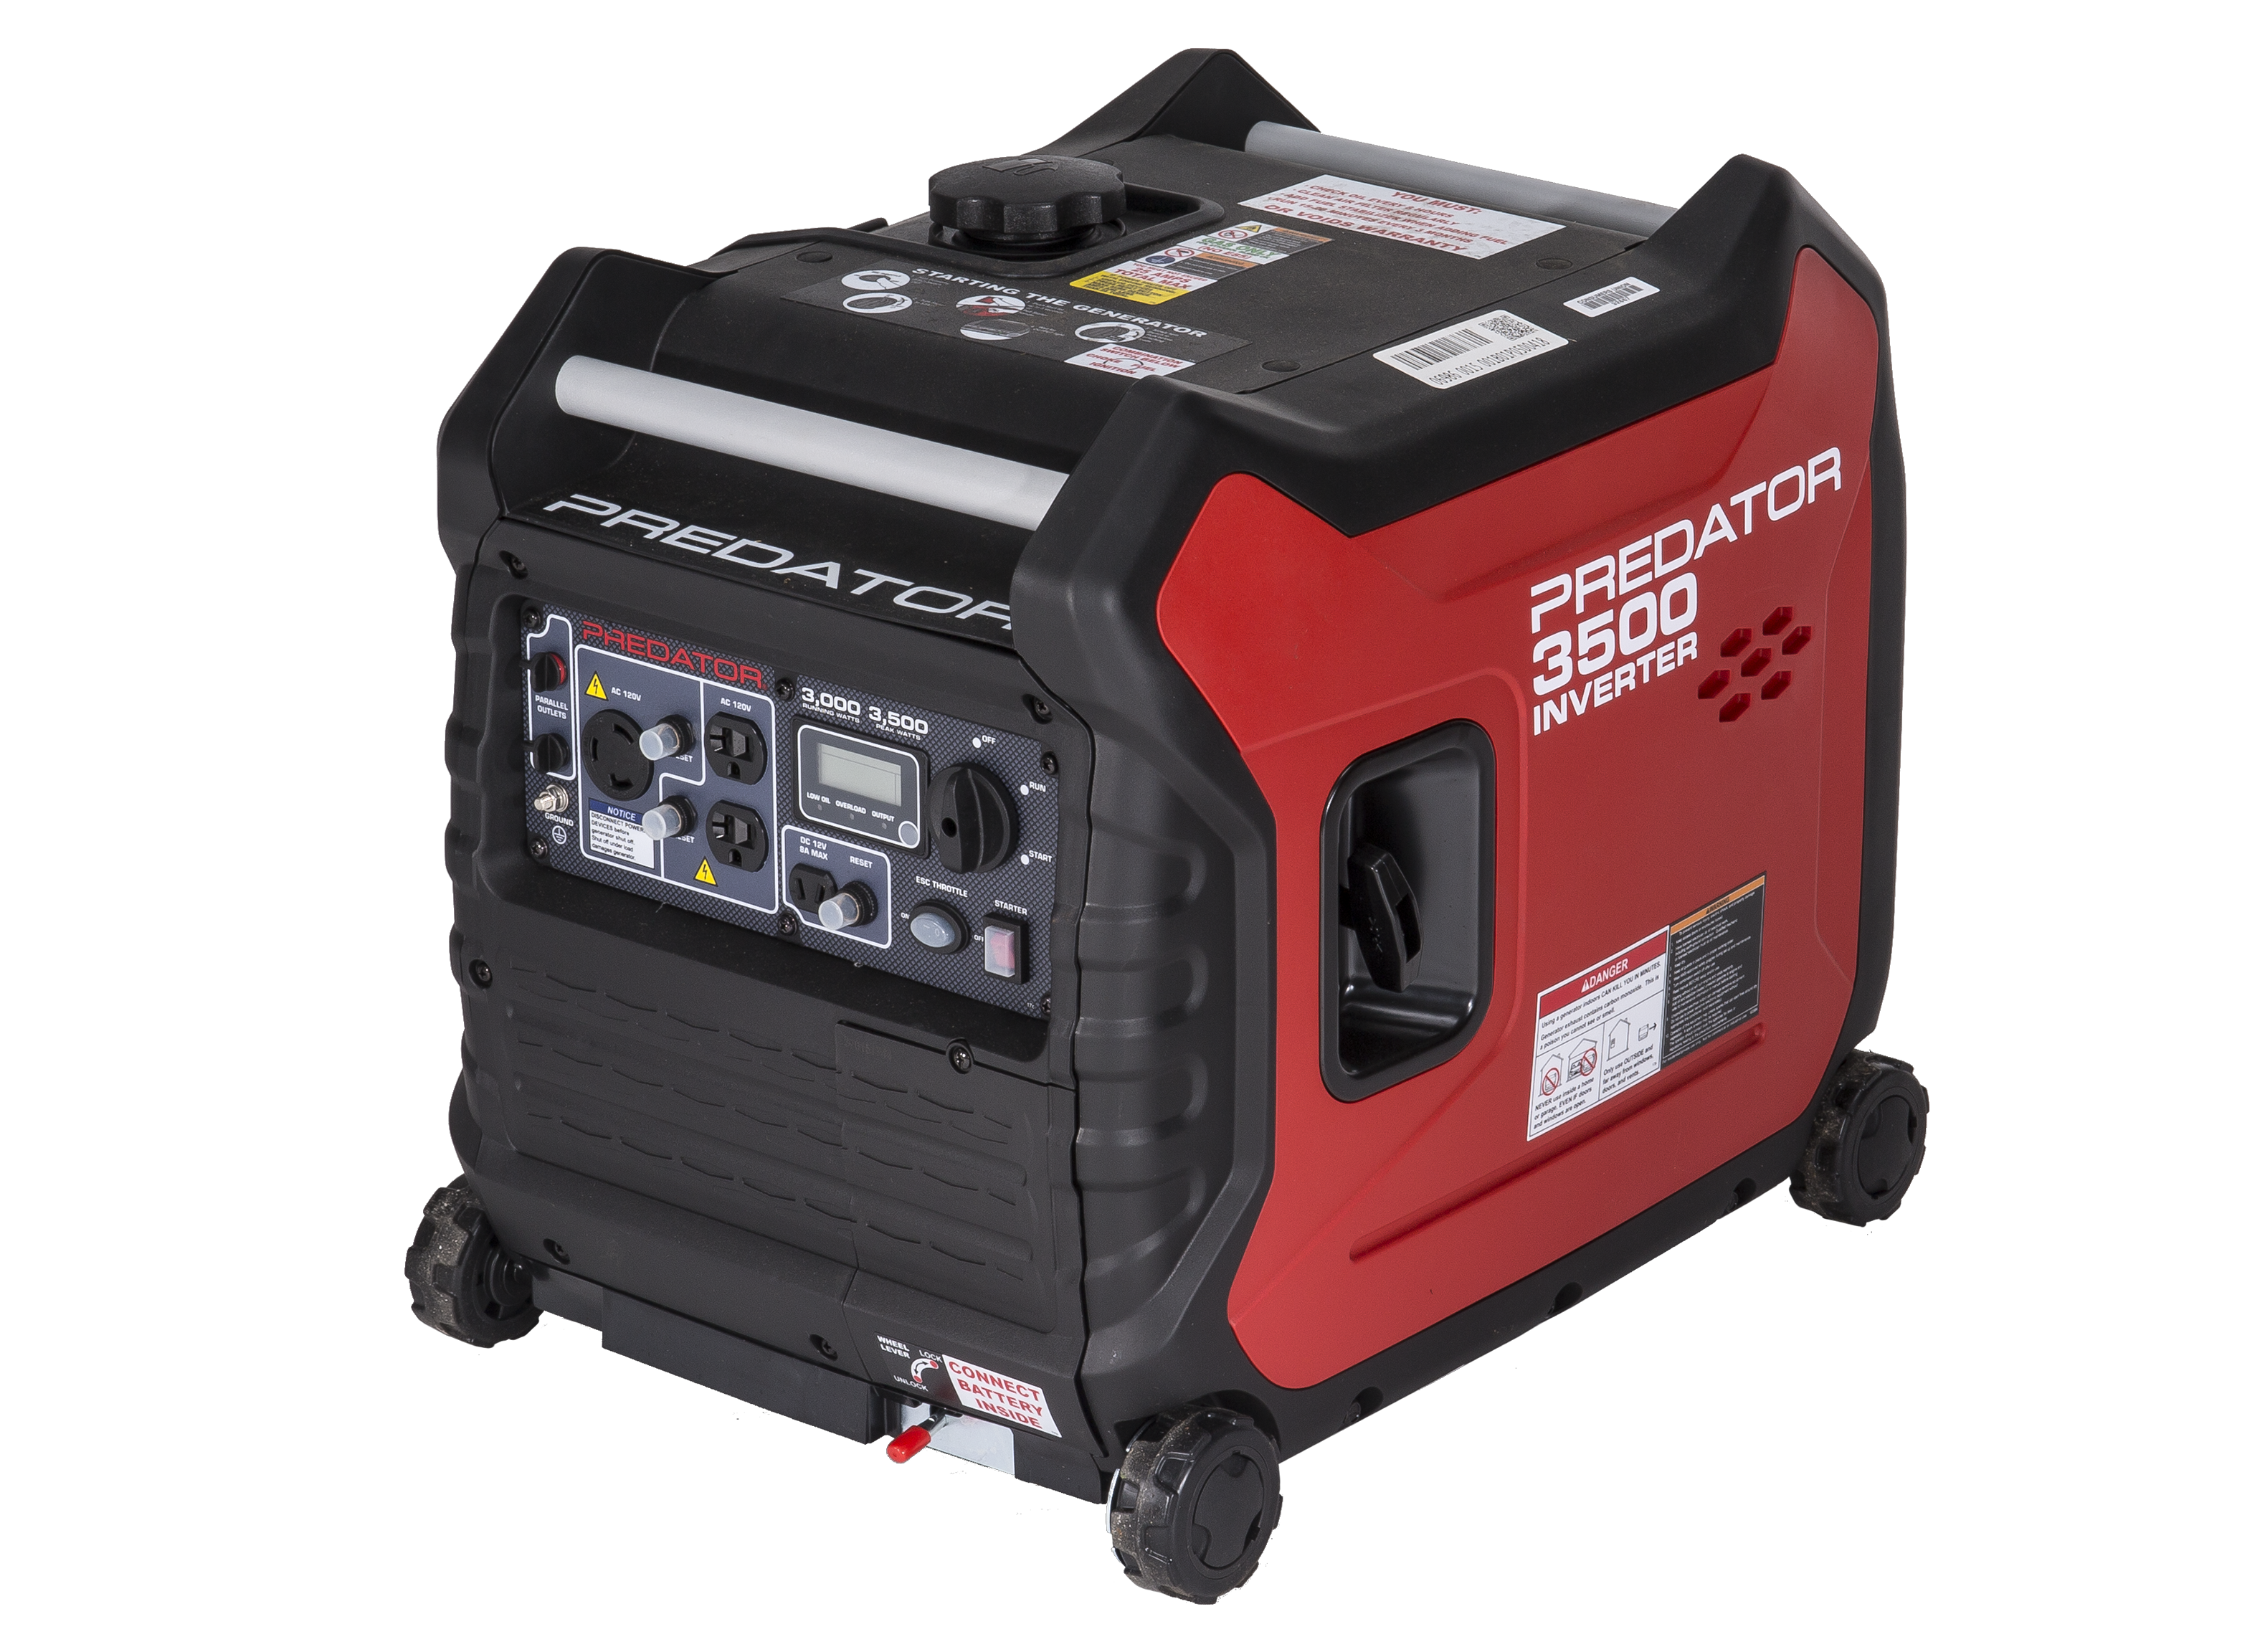 What Is A Predator 2500 Generator?